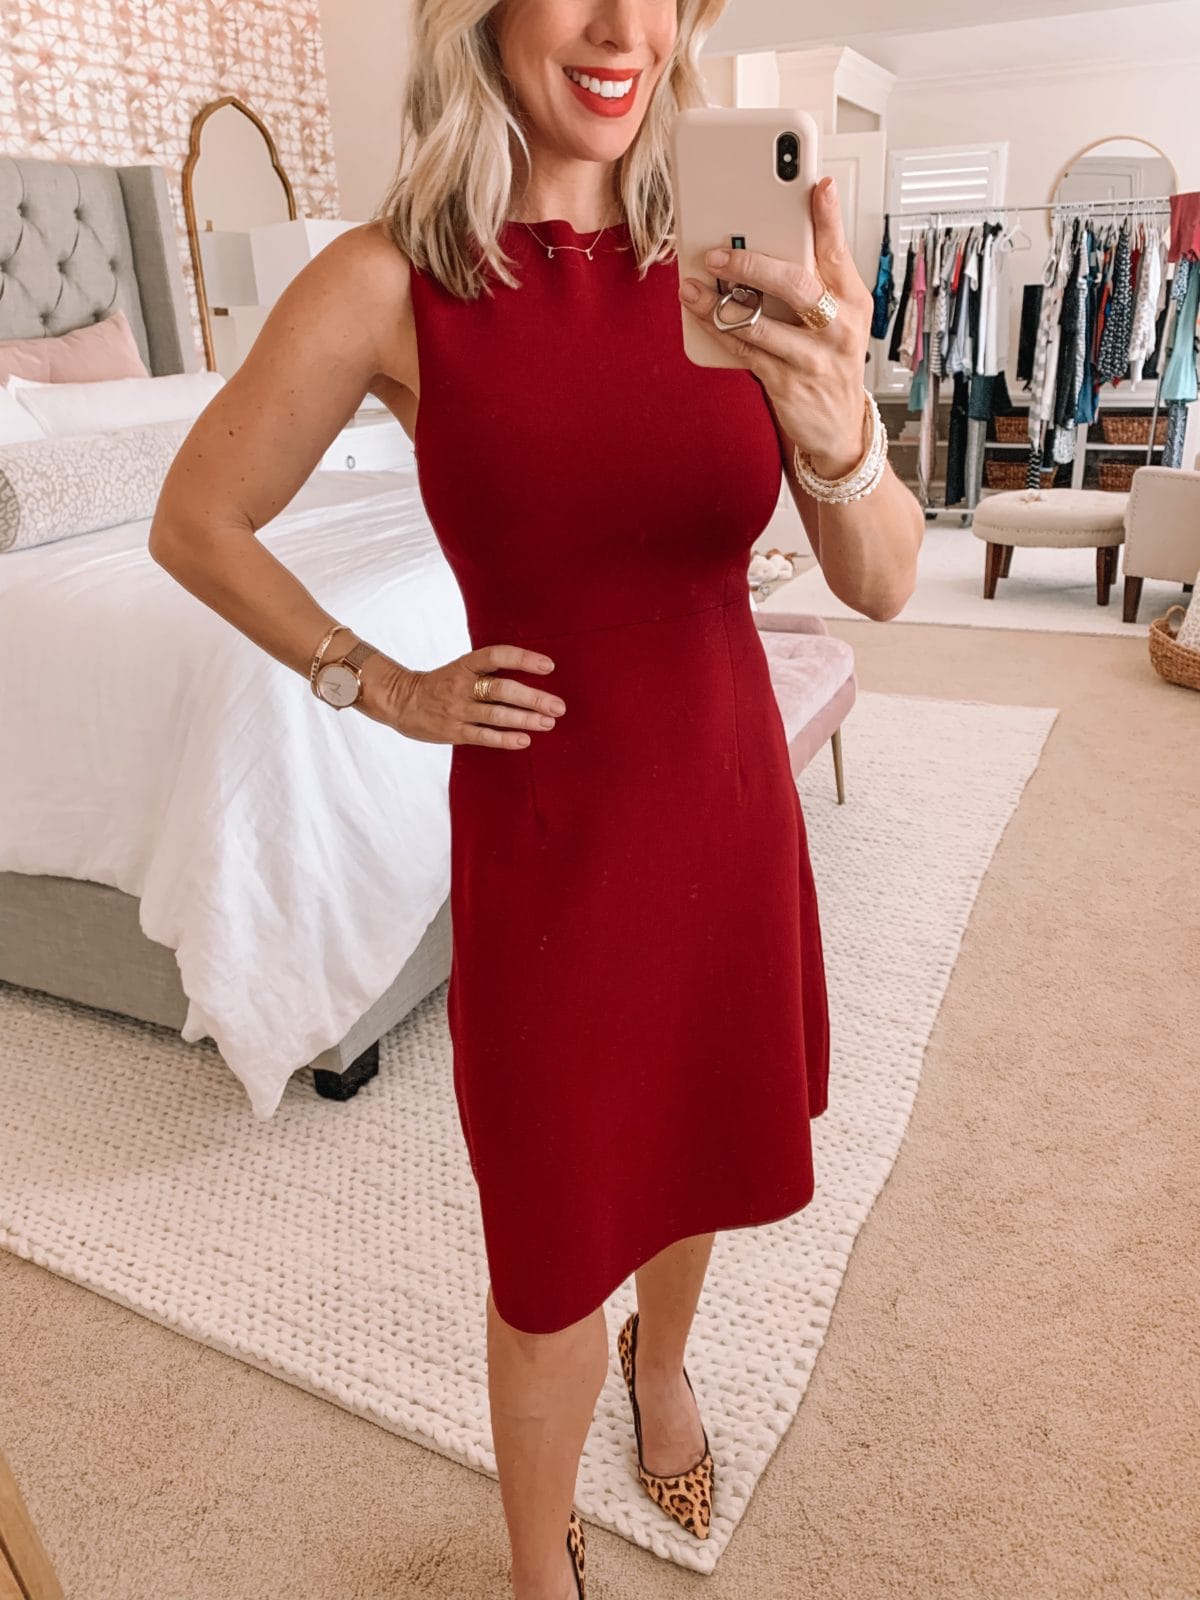 Amazon Fashion Finds, Fit and Flare Dress, Leopard Heels